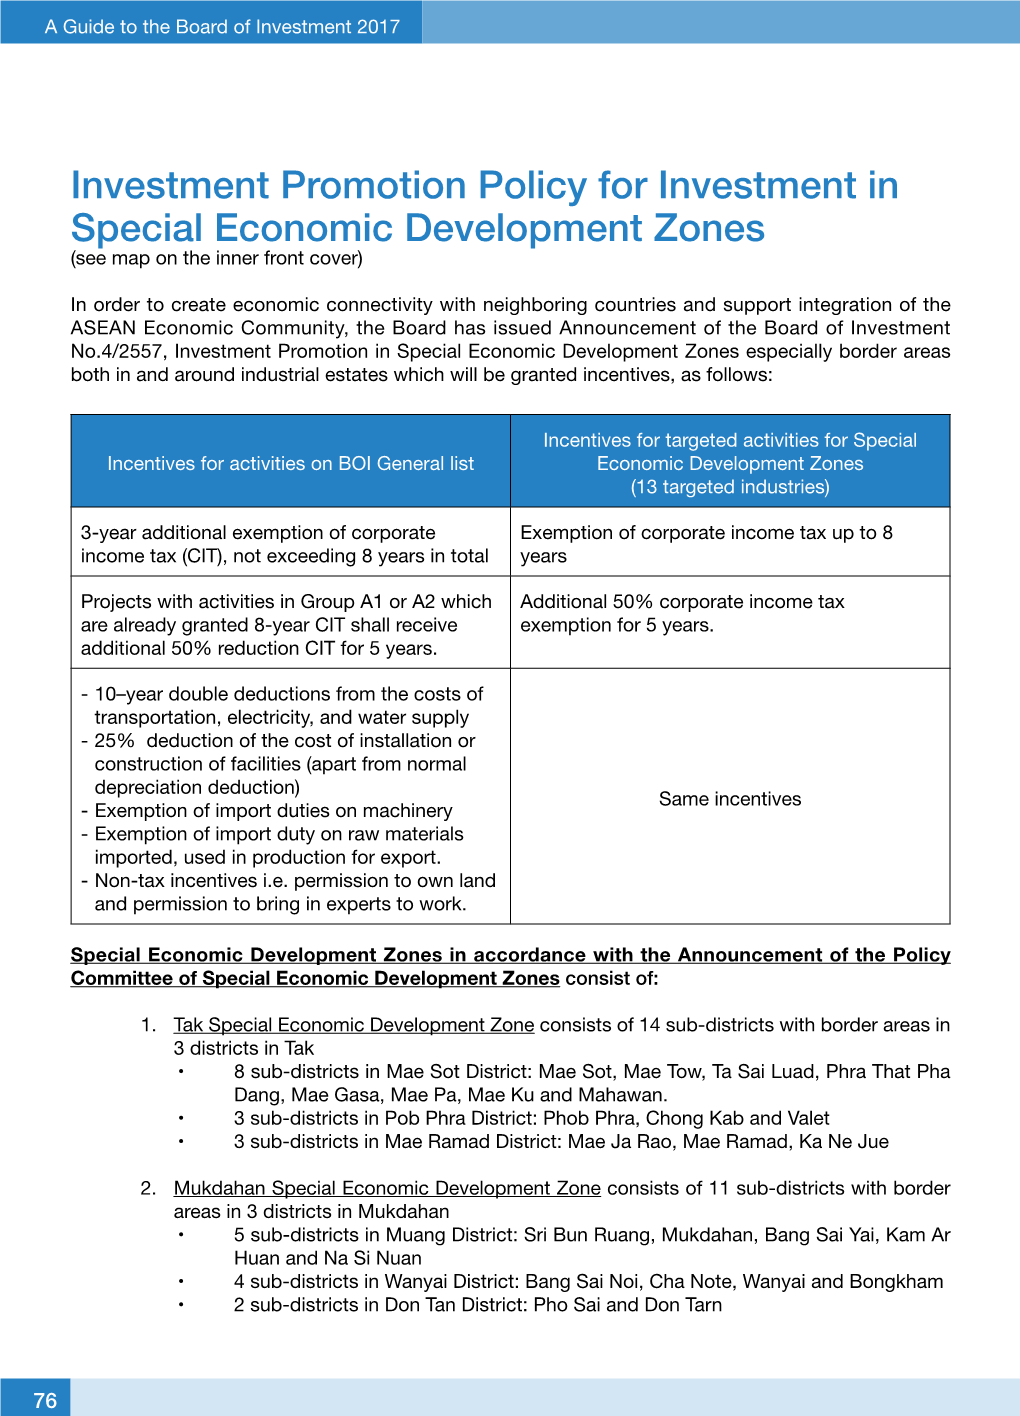 Investment Promotion Policy for Investment in Special Economic Development Zones (See Map on the Inner Front Cover)